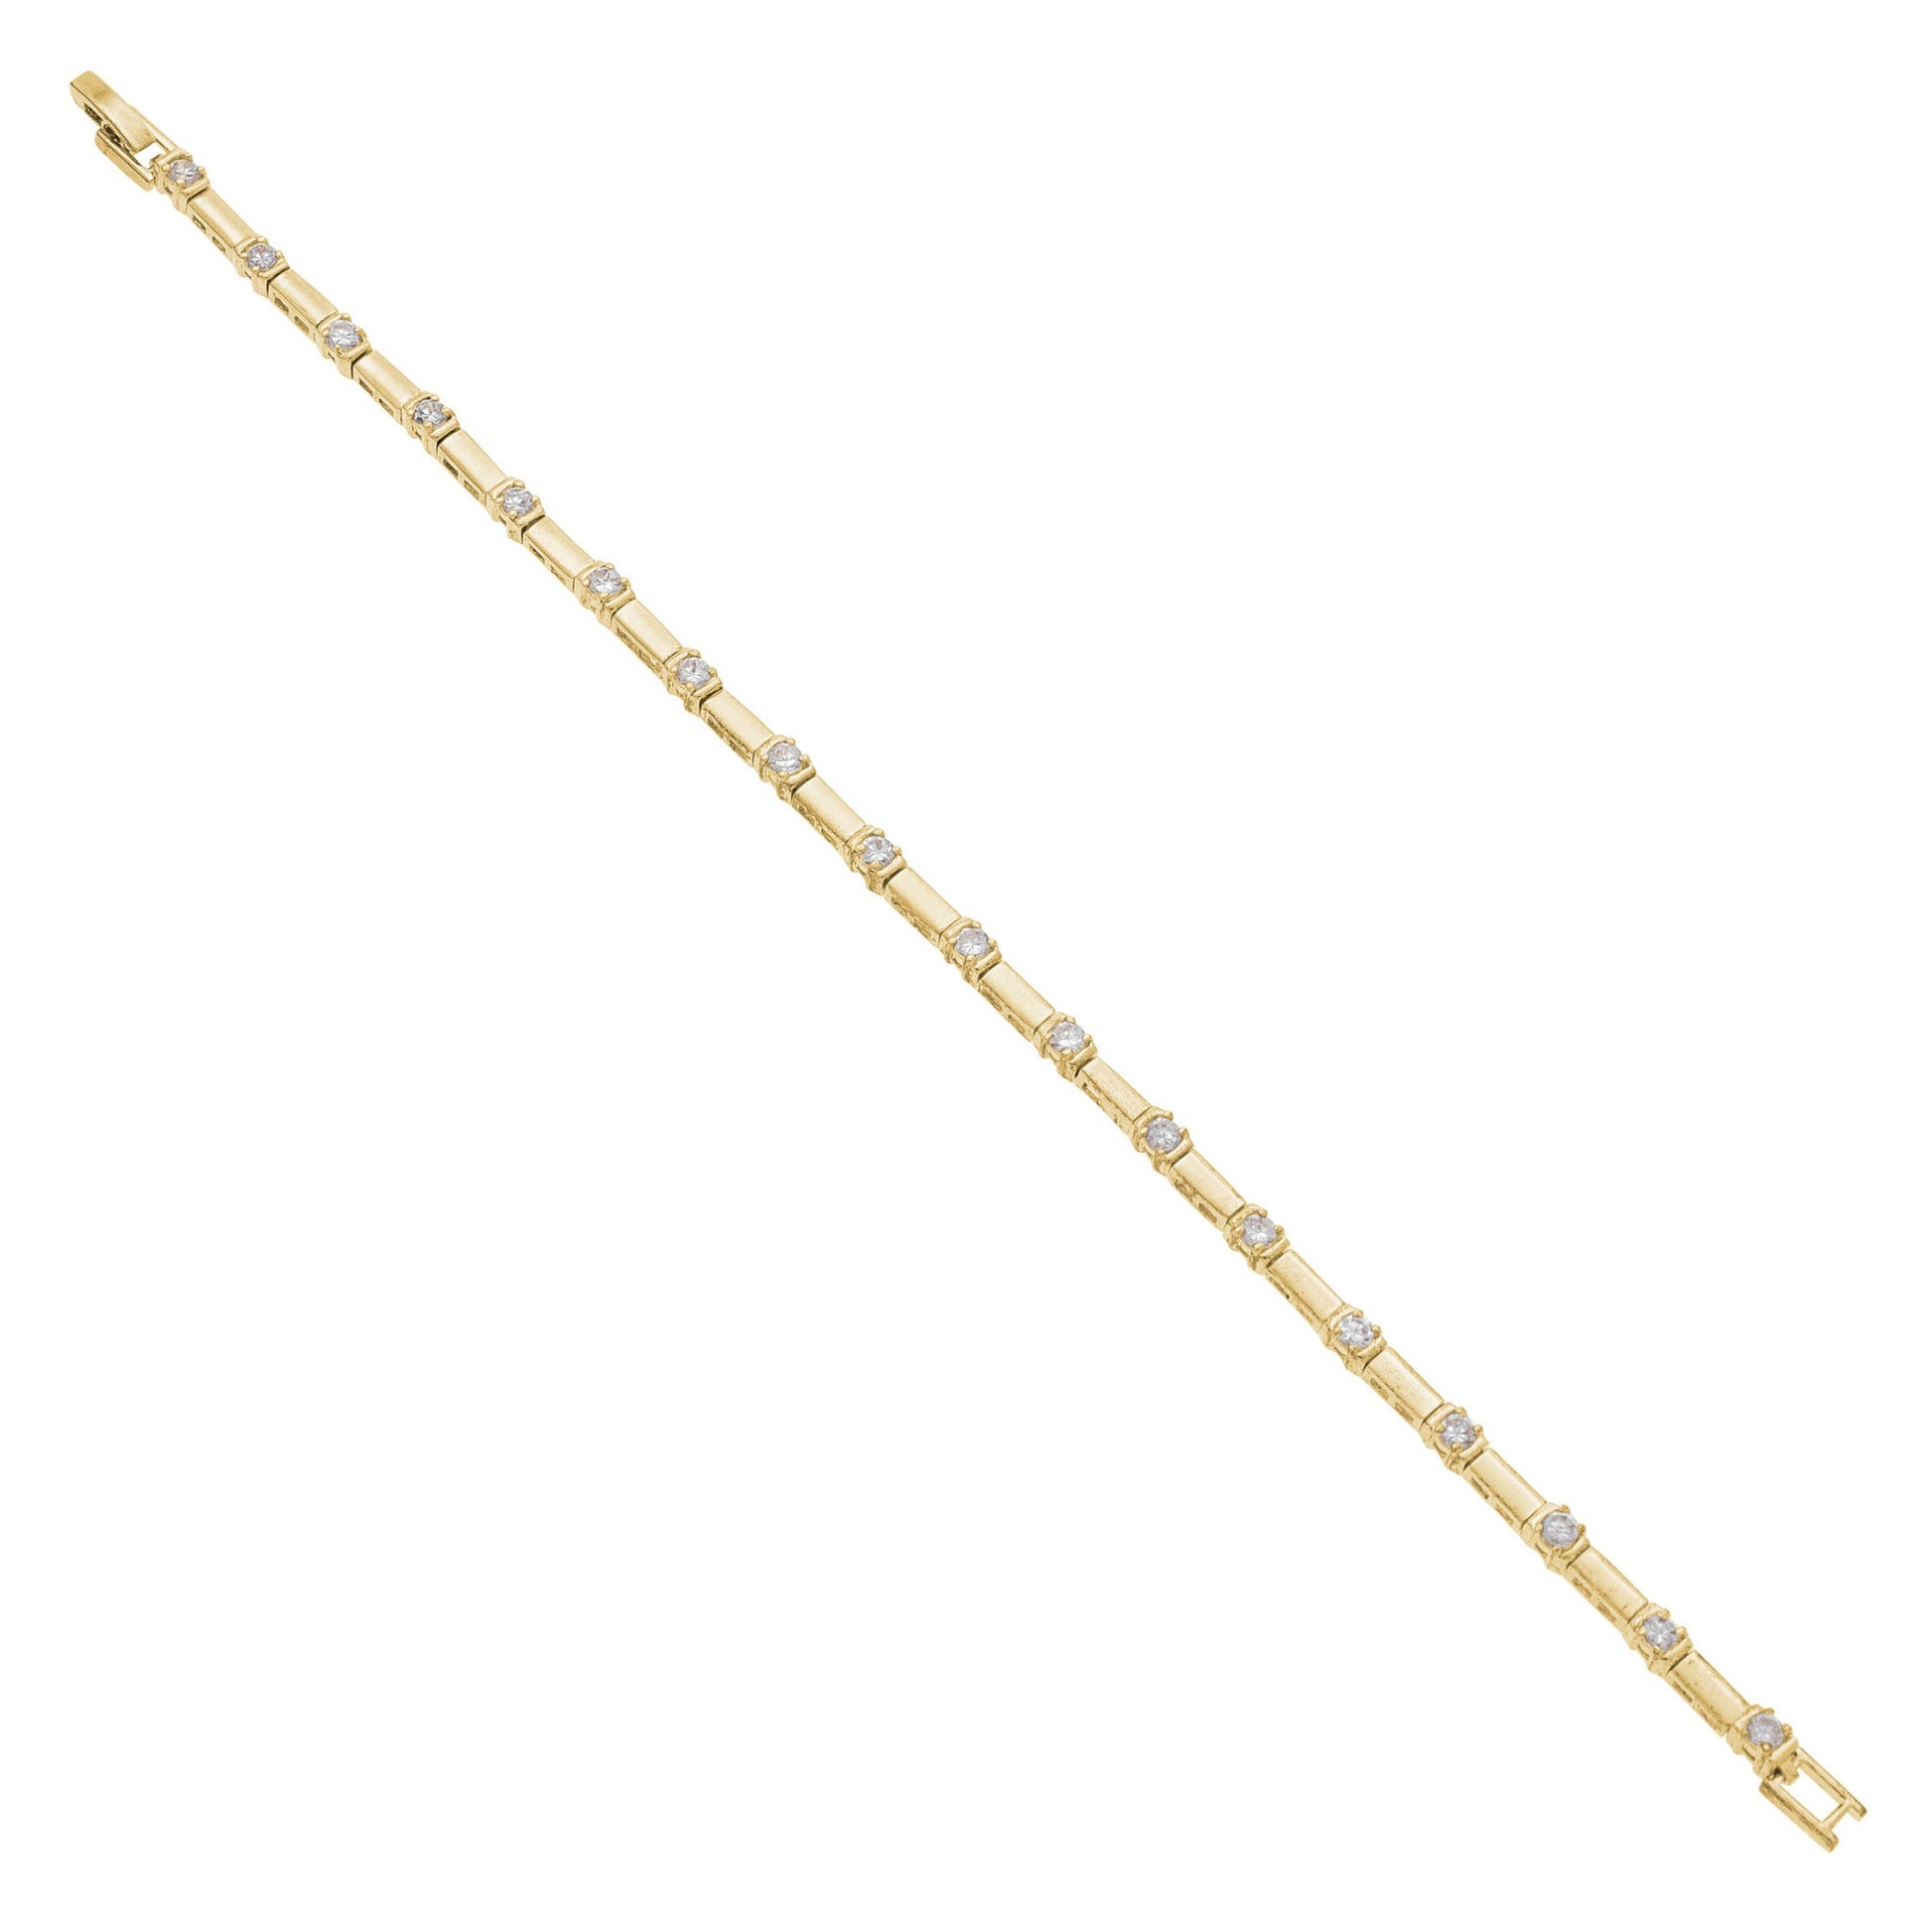 A 8.25" rectangle bar simulated diamond bracelet displayed on a neutral white background.